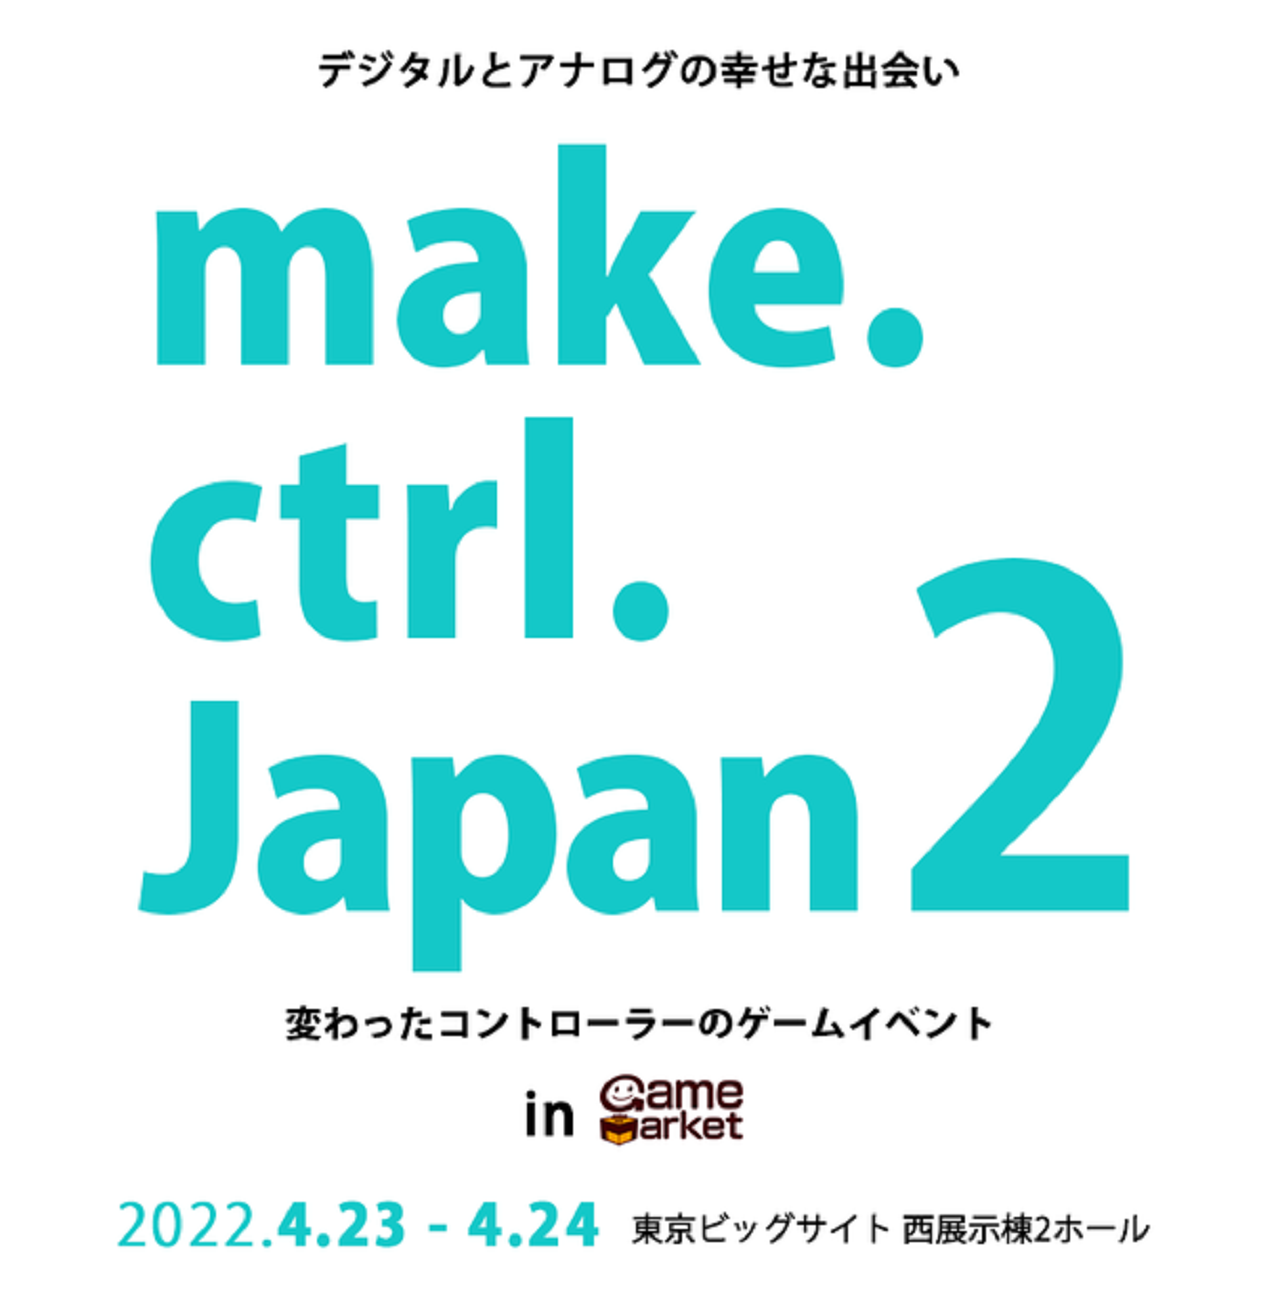 make.ctrl.Japan2 exhibit is dedicated to games that use alternative controllers